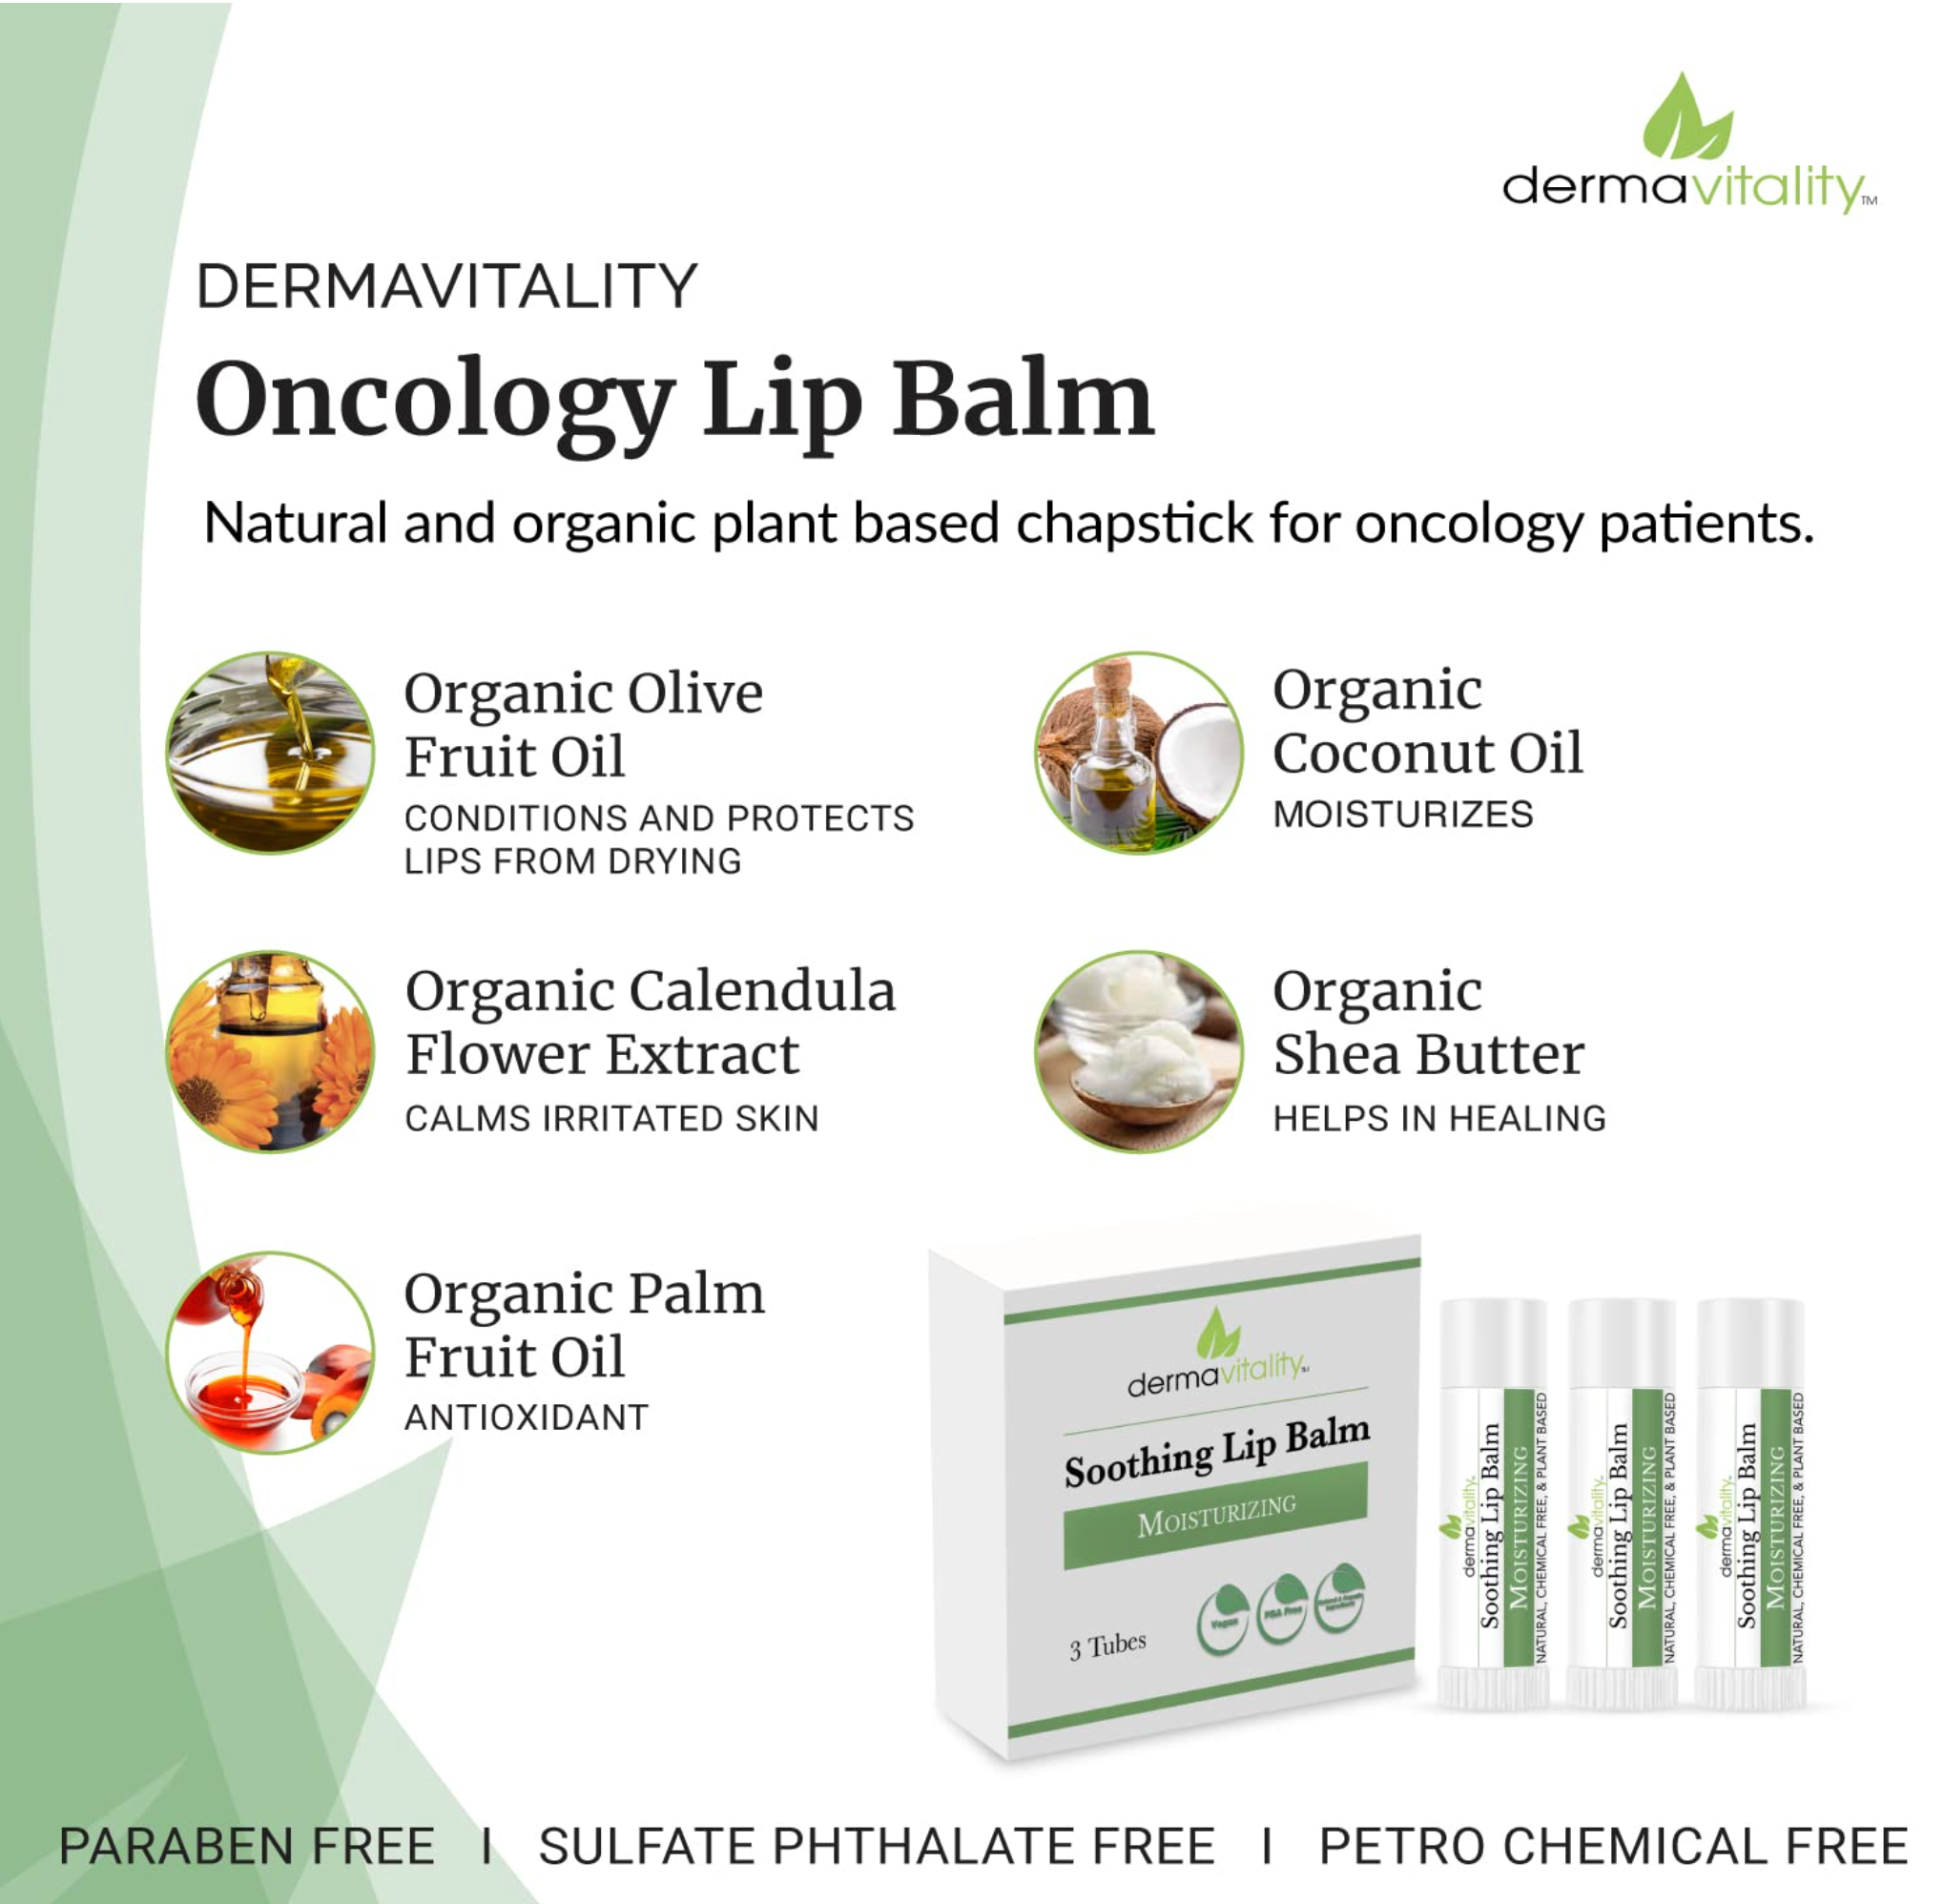 Dermavitality Organic Soothing Lip Balm for Oncology Patients